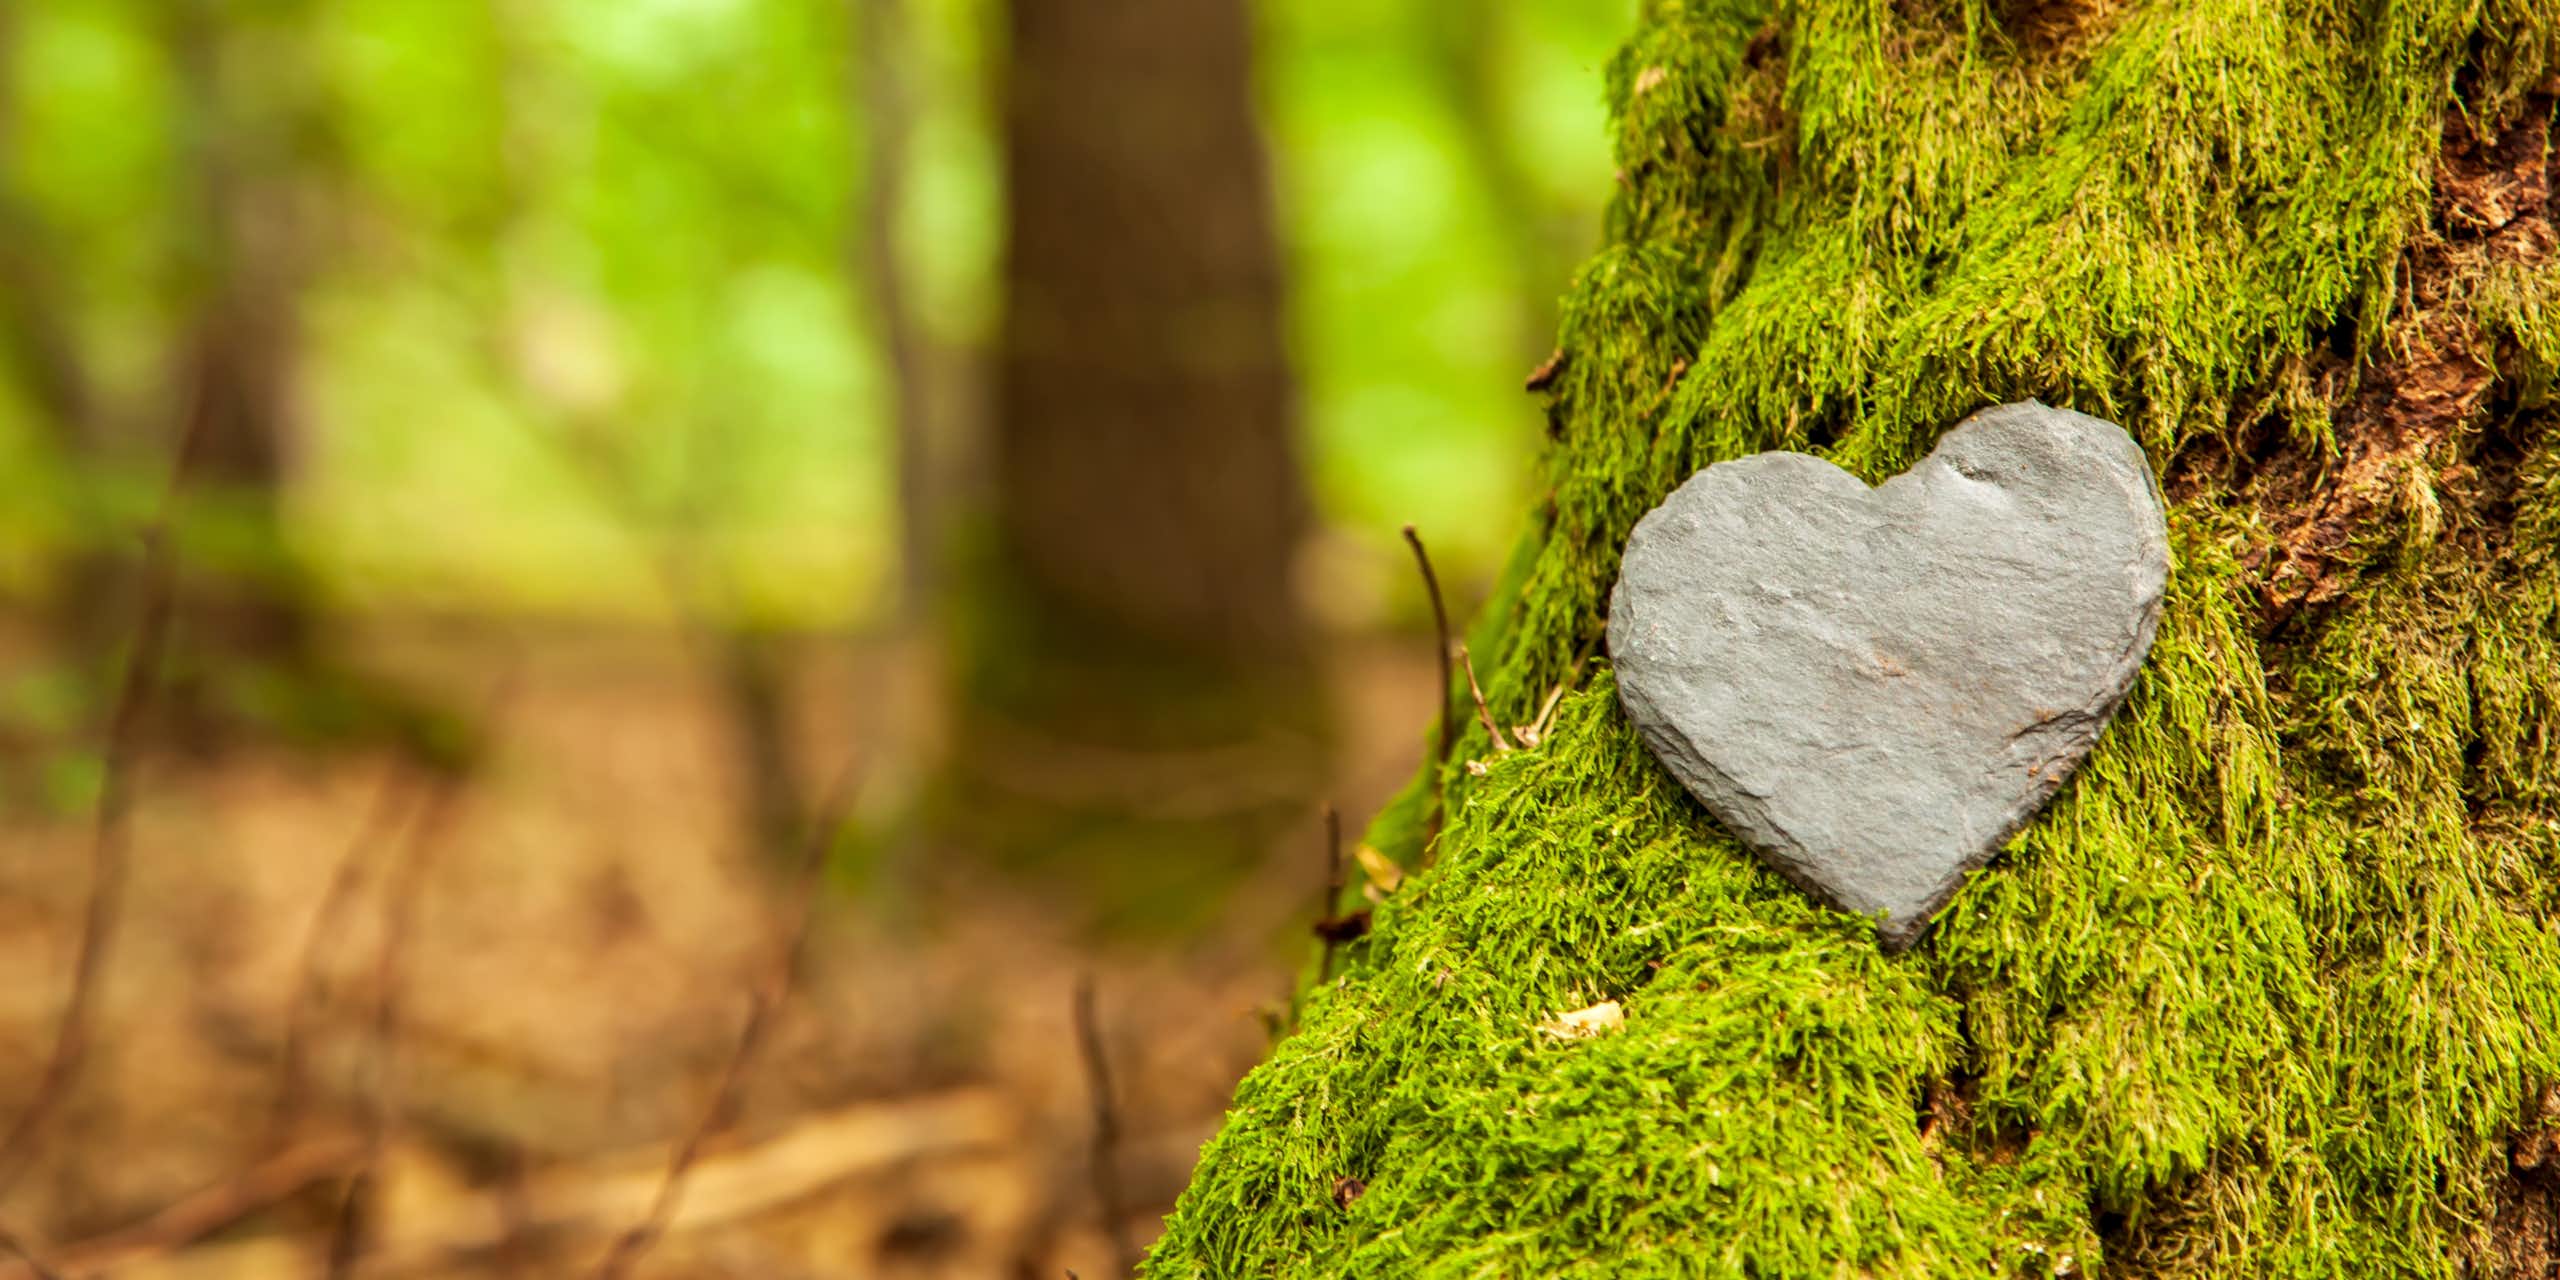 shot of mossy tree trunk in foreground on right with grey heart shaped stone resting on it, blurry woodland background to left side